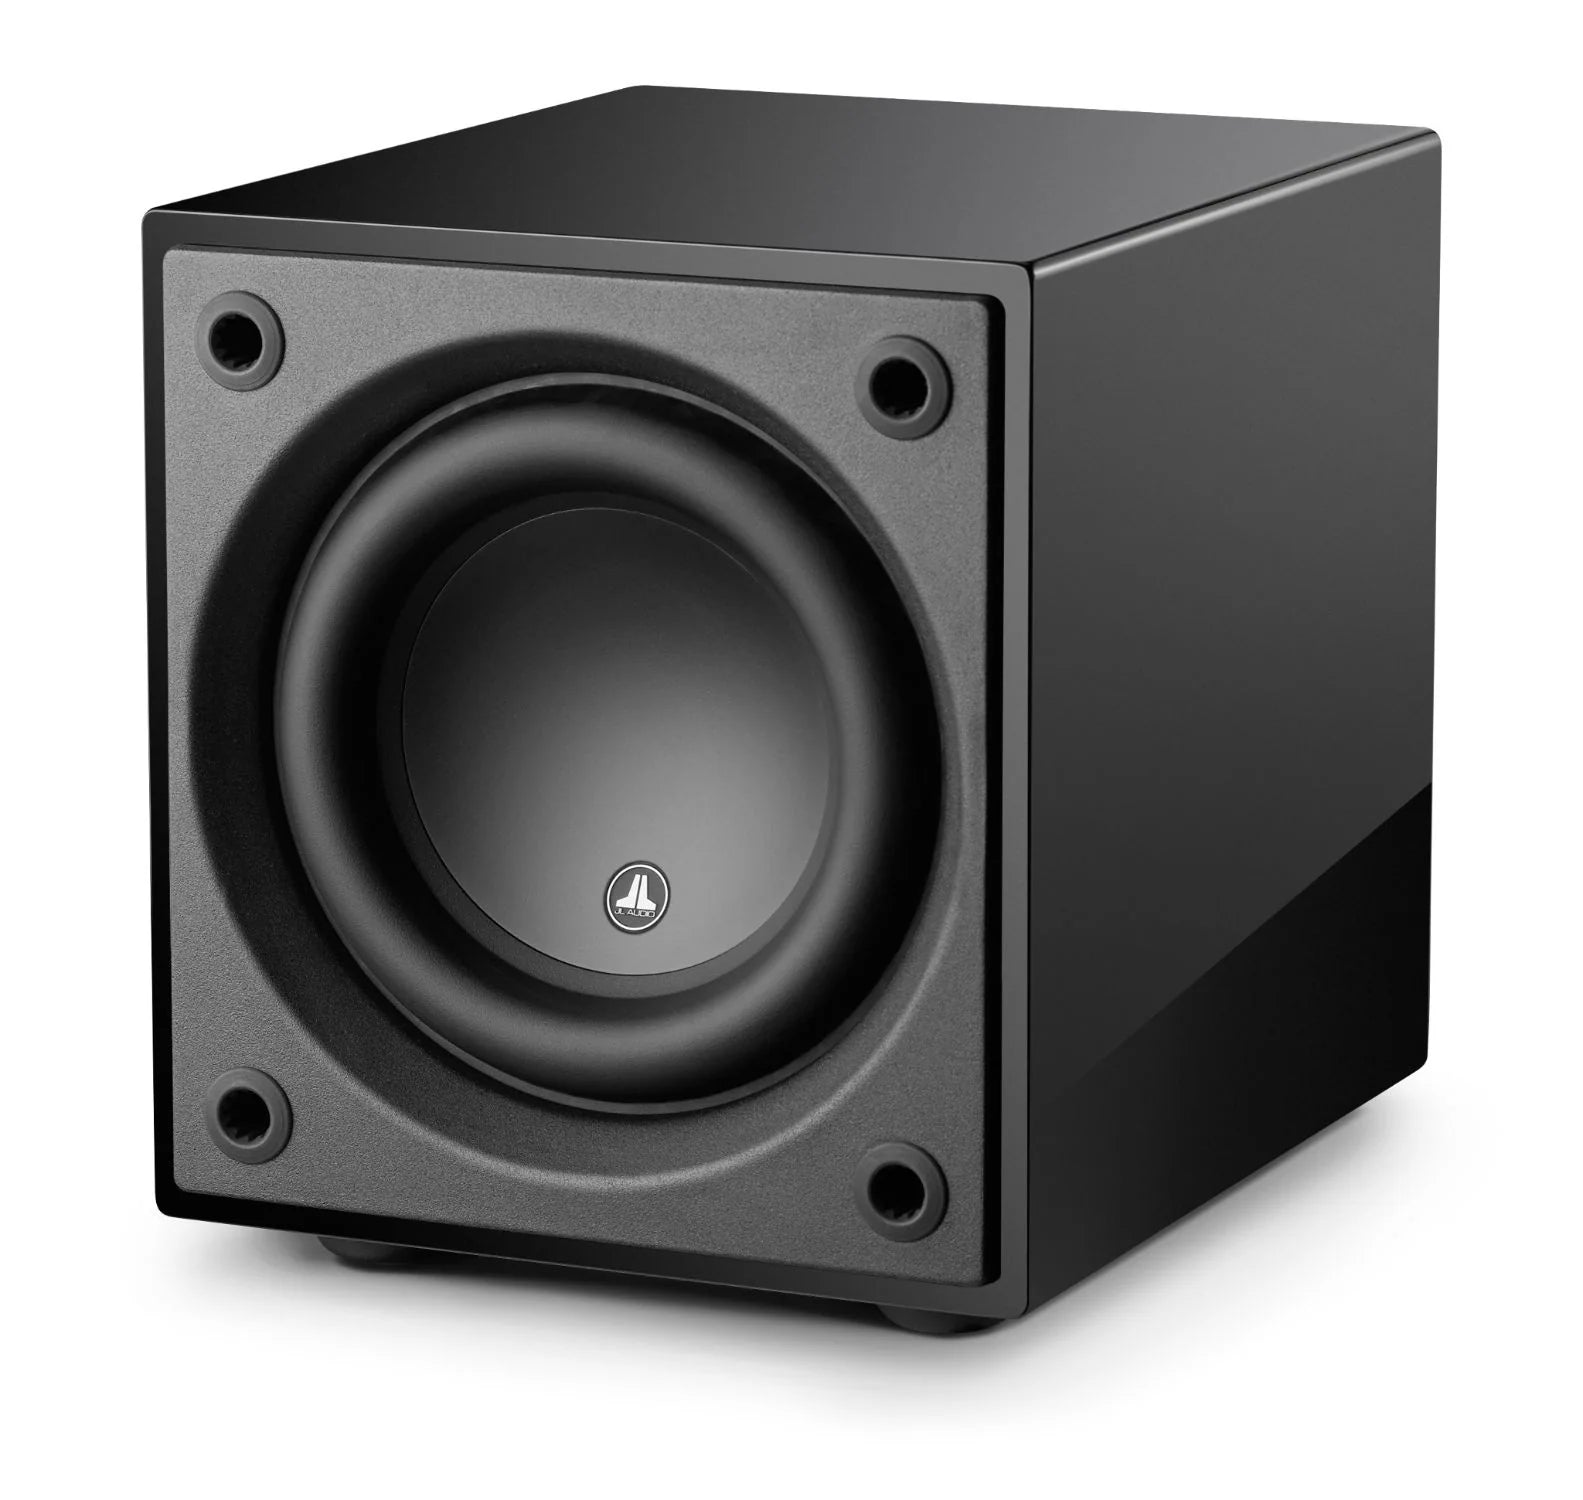 JL AUDIO DOMINION D108-GLOSS 8INCH SUBWOOFER